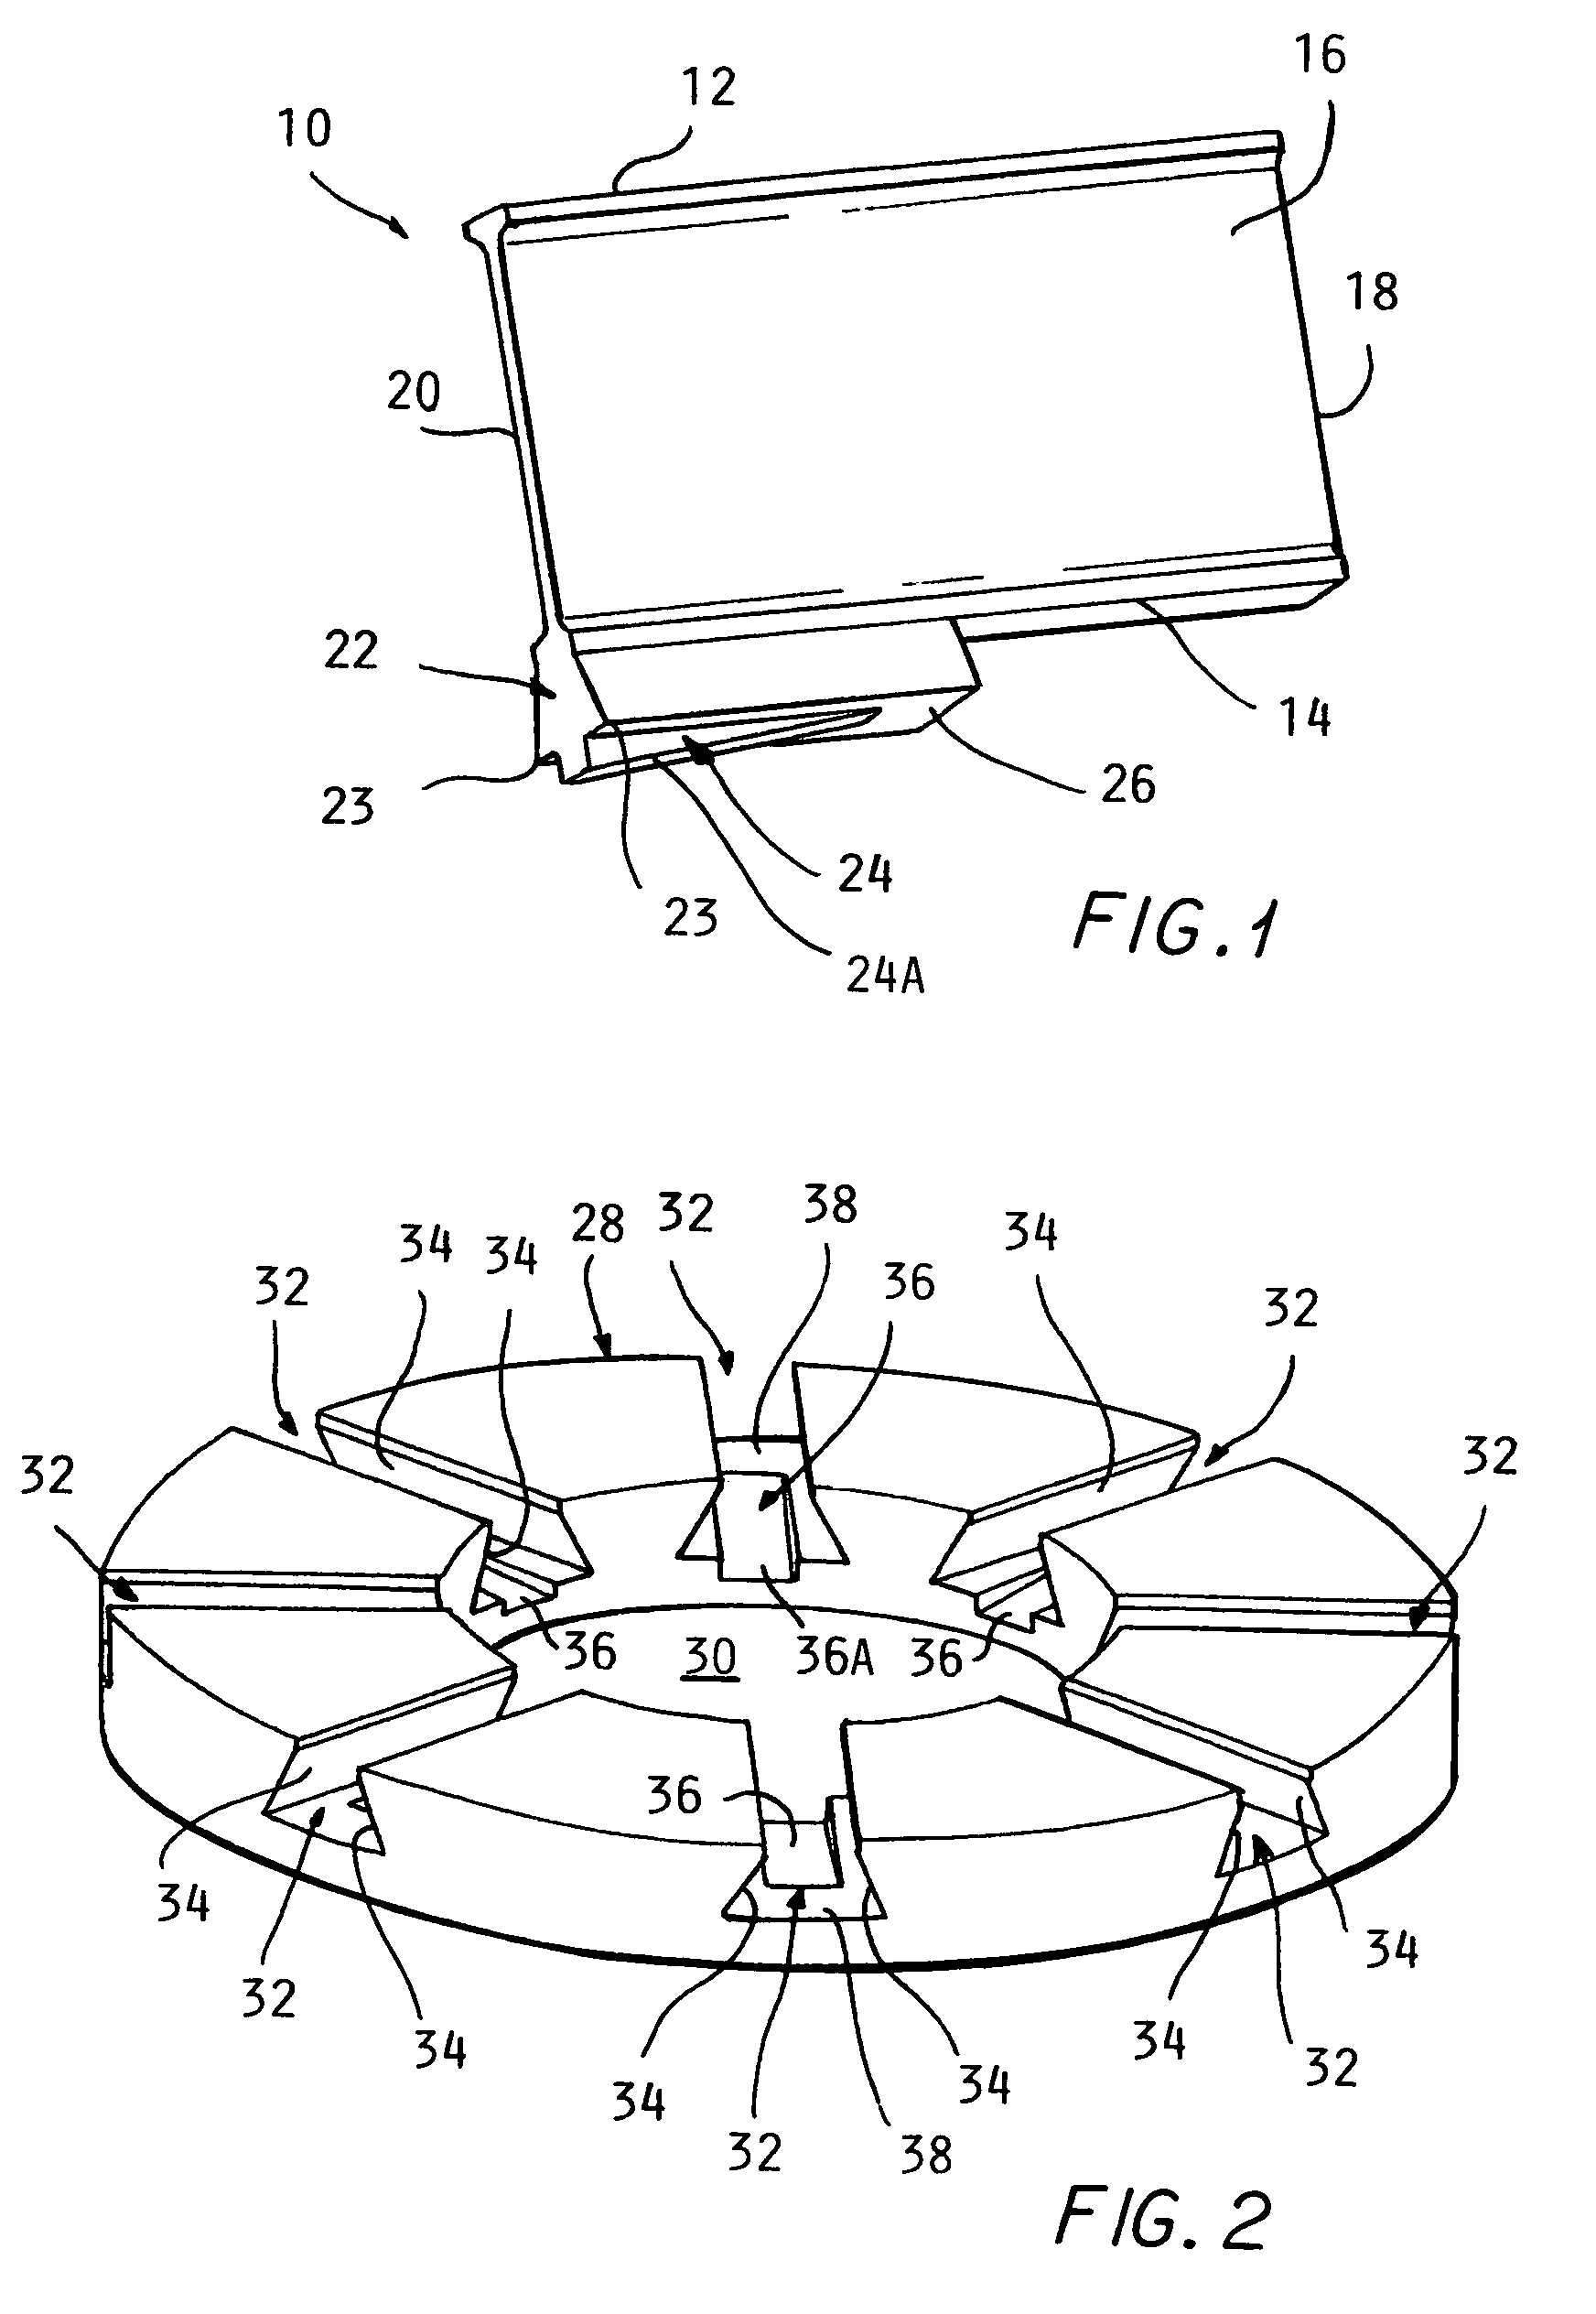 Throwing wheel assembly